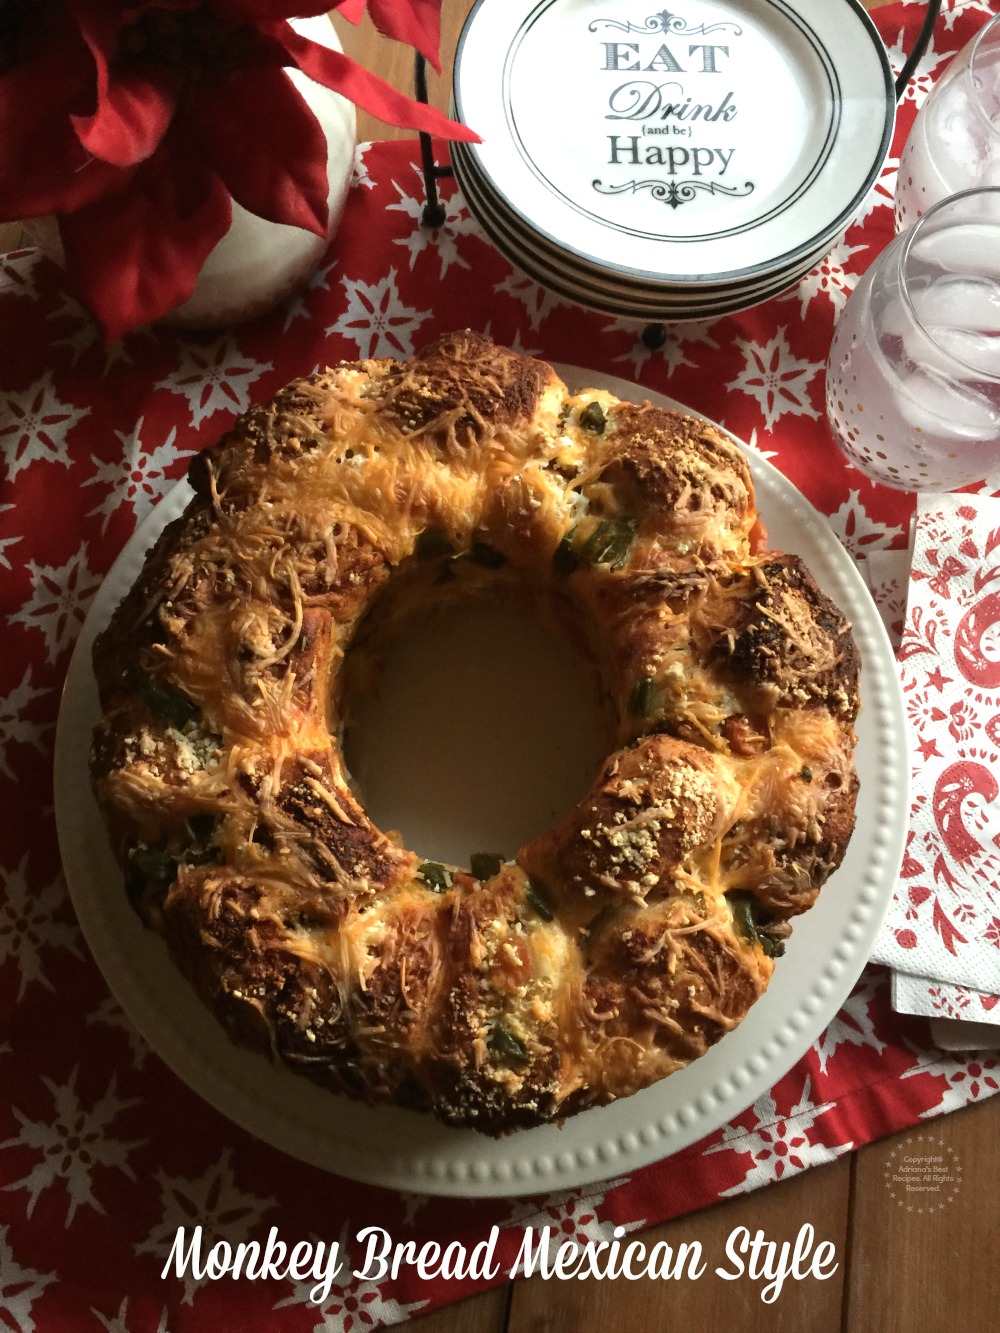 Monkey Bread Mexican Style to eat and be happy this holiday season